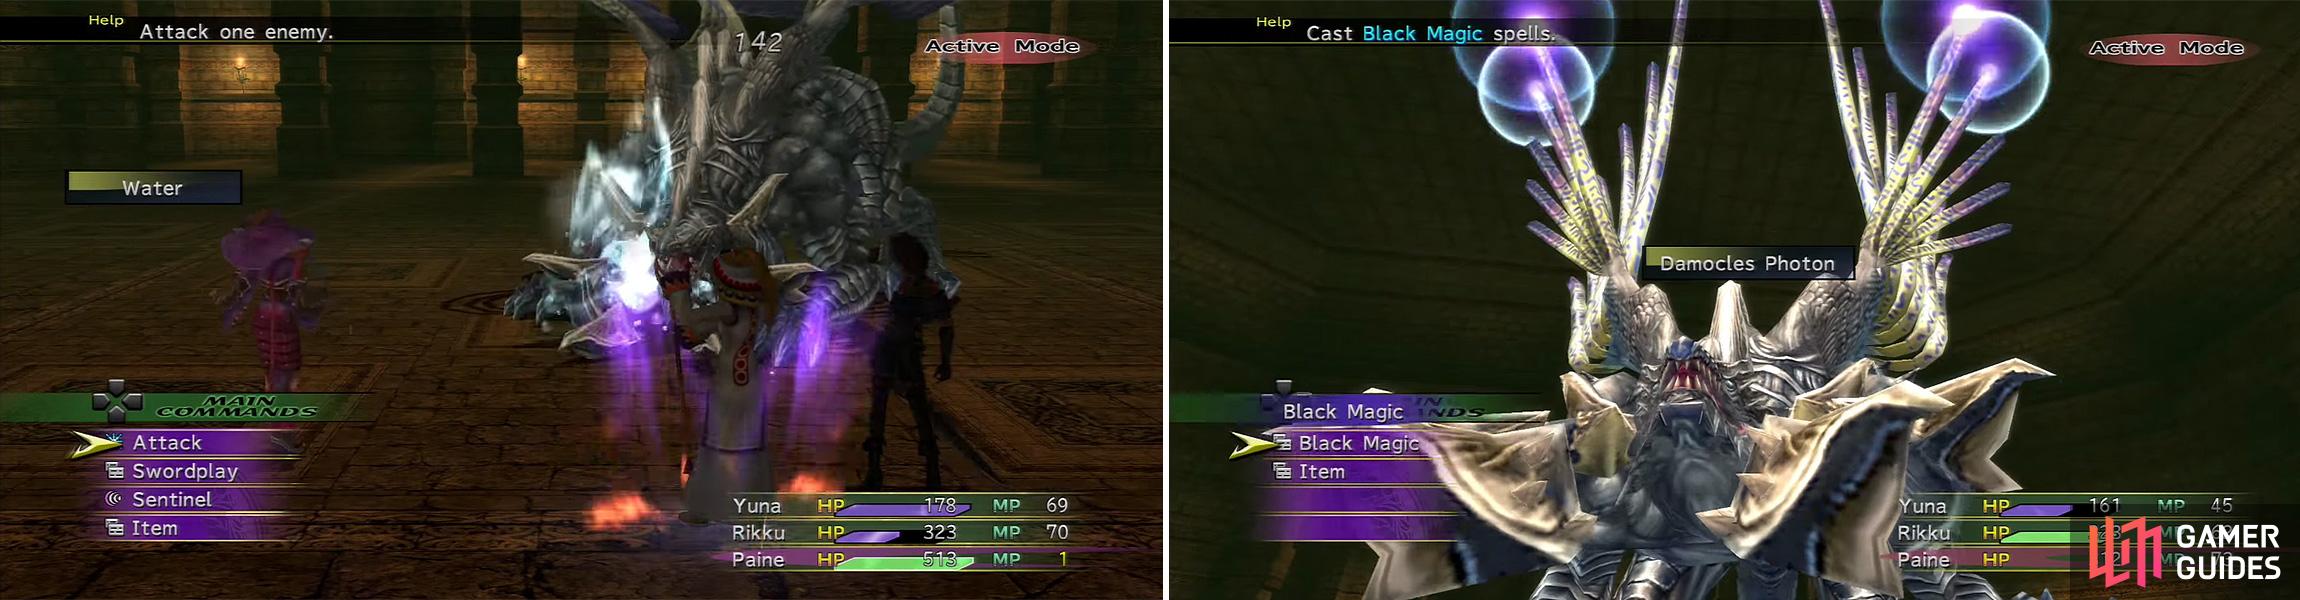 Elemental attacks (left) are the best way to kill Guardian Beast. Damocles Photon (right) is a powerful attack the Beast will use once its HP is under 1000.